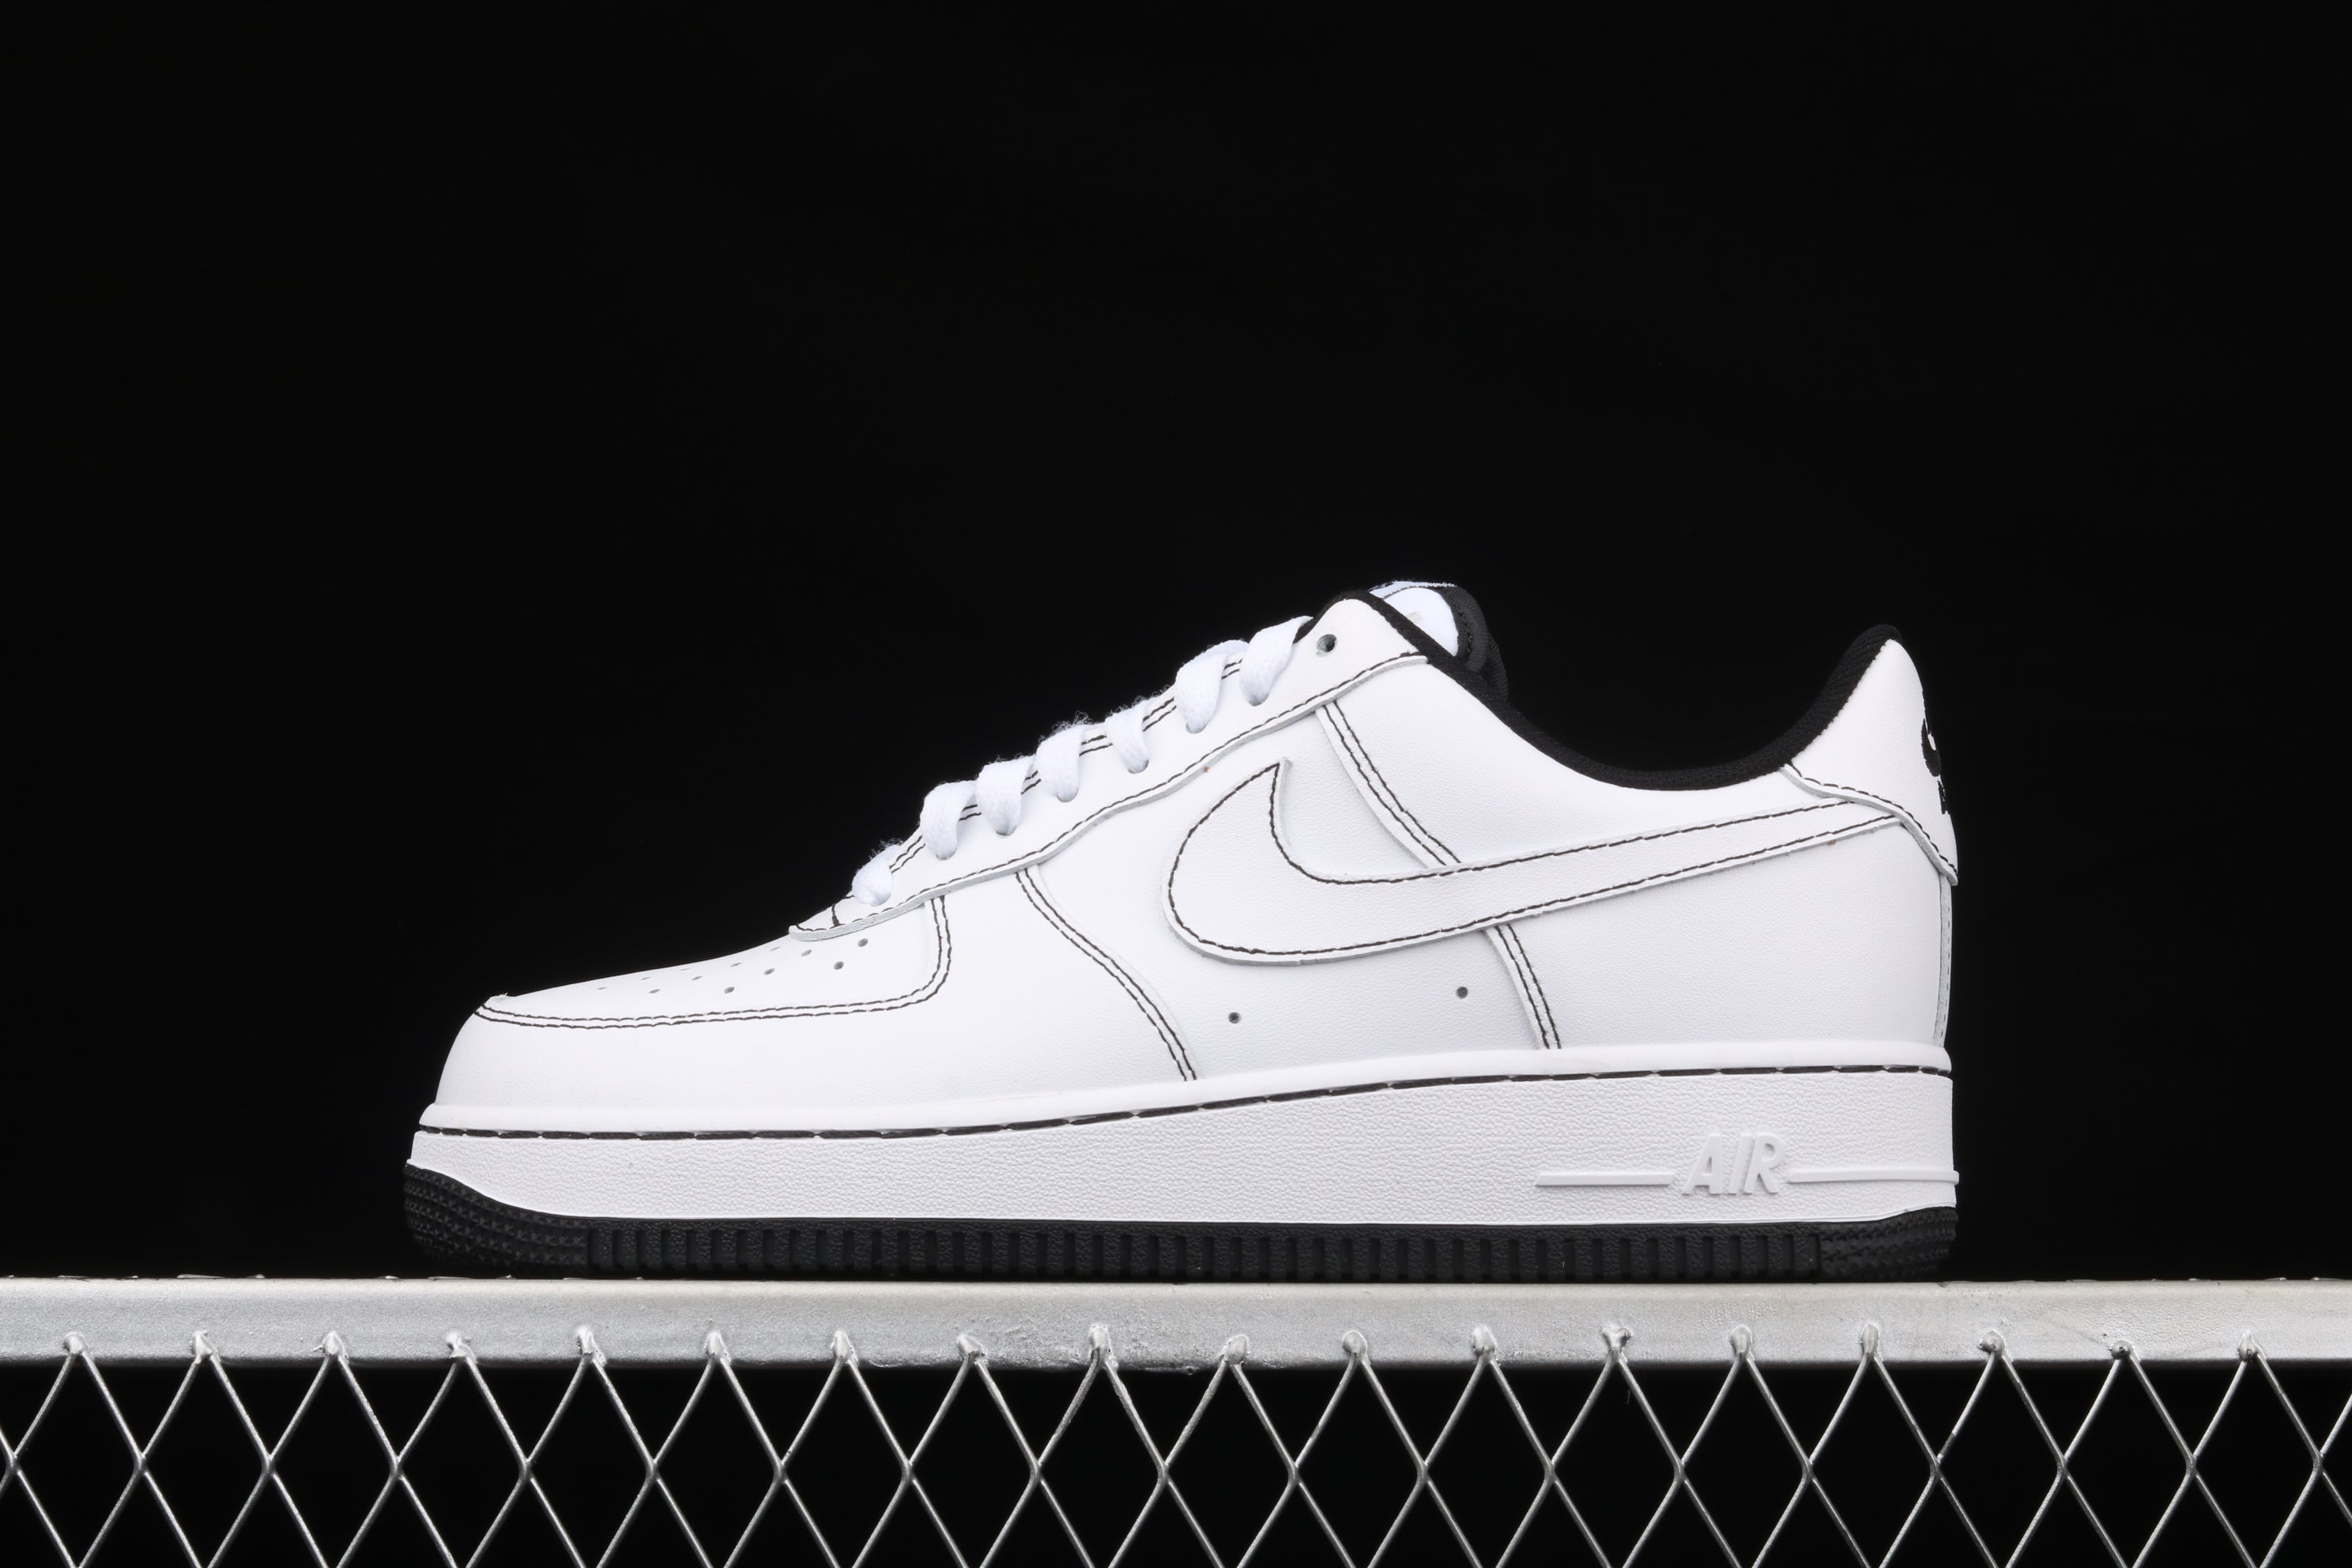 NikeMens Air Force 1 AF1 Low Contrast Stitch - White